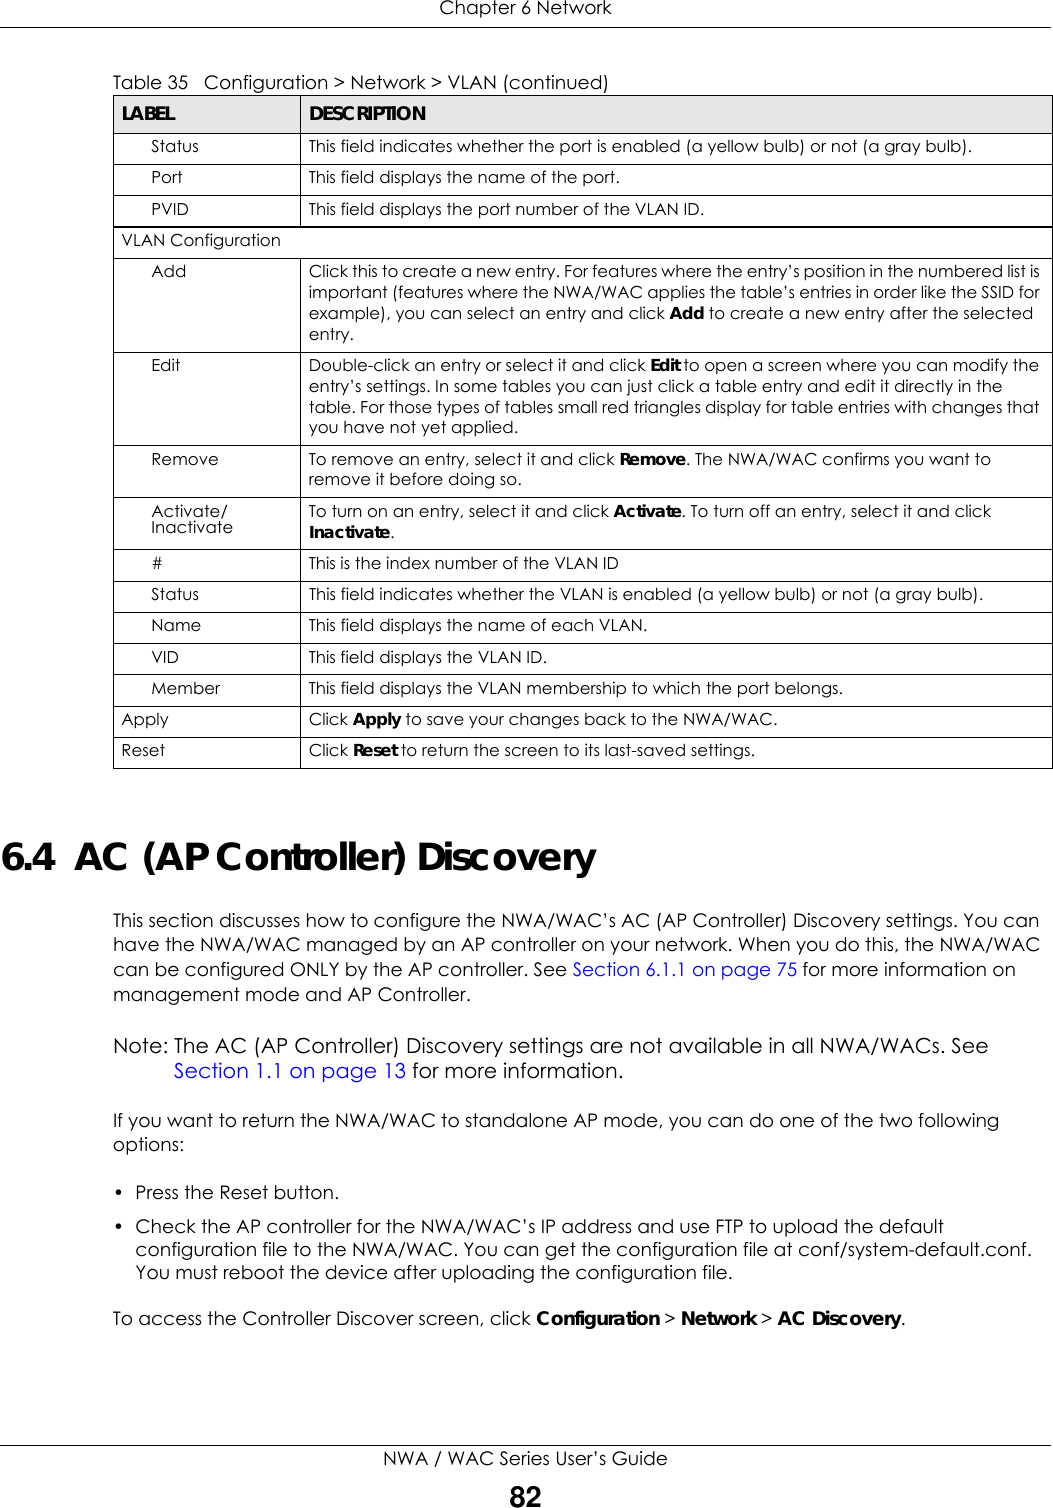 Chapter 6 NetworkNWA / WAC Series User’s Guide826.4  AC (AP Controller) DiscoveryThis section discusses how to configure the NWA/WAC’s AC (AP Controller) Discovery settings. You can have the NWA/WAC managed by an AP controller on your network. When you do this, the NWA/WAC can be configured ONLY by the AP controller. See Section 6.1.1 on page 75 for more information on management mode and AP Controller.Note: The AC (AP Controller) Discovery settings are not available in all NWA/WACs. See Section 1.1 on page 13 for more information.If you want to return the NWA/WAC to standalone AP mode, you can do one of the two following options: • Press the Reset button.• Check the AP controller for the NWA/WAC’s IP address and use FTP to upload the default configuration file to the NWA/WAC. You can get the configuration file at conf/system-default.conf. You must reboot the device after uploading the configuration file. To access the Controller Discover screen, click Configuration &gt; Network &gt; AC Discovery.Status This field indicates whether the port is enabled (a yellow bulb) or not (a gray bulb).Port This field displays the name of the port. PVID This field displays the port number of the VLAN ID.VLAN ConfigurationAdd Click this to create a new entry. For features where the entry’s position in the numbered list is important (features where the NWA/WAC applies the table’s entries in order like the SSID for example), you can select an entry and click Add to create a new entry after the selected entry.Edit Double-click an entry or select it and click Edit to open a screen where you can modify the entry’s settings. In some tables you can just click a table entry and edit it directly in the table. For those types of tables small red triangles display for table entries with changes that you have not yet applied.Remove To remove an entry, select it and click Remove. The NWA/WAC confirms you want to remove it before doing so.Activate/Inactivate To turn on an entry, select it and click Activate. To turn off an entry, select it and click Inactivate.# This is the index number of the VLAN ID Status This field indicates whether the VLAN is enabled (a yellow bulb) or not (a gray bulb).Name This field displays the name of each VLAN.VID This field displays the VLAN ID.Member This field displays the VLAN membership to which the port belongs.Apply Click Apply to save your changes back to the NWA/WAC.Reset Click Reset to return the screen to its last-saved settings. Table 35   Configuration &gt; Network &gt; VLAN (continued)LABEL  DESCRIPTION